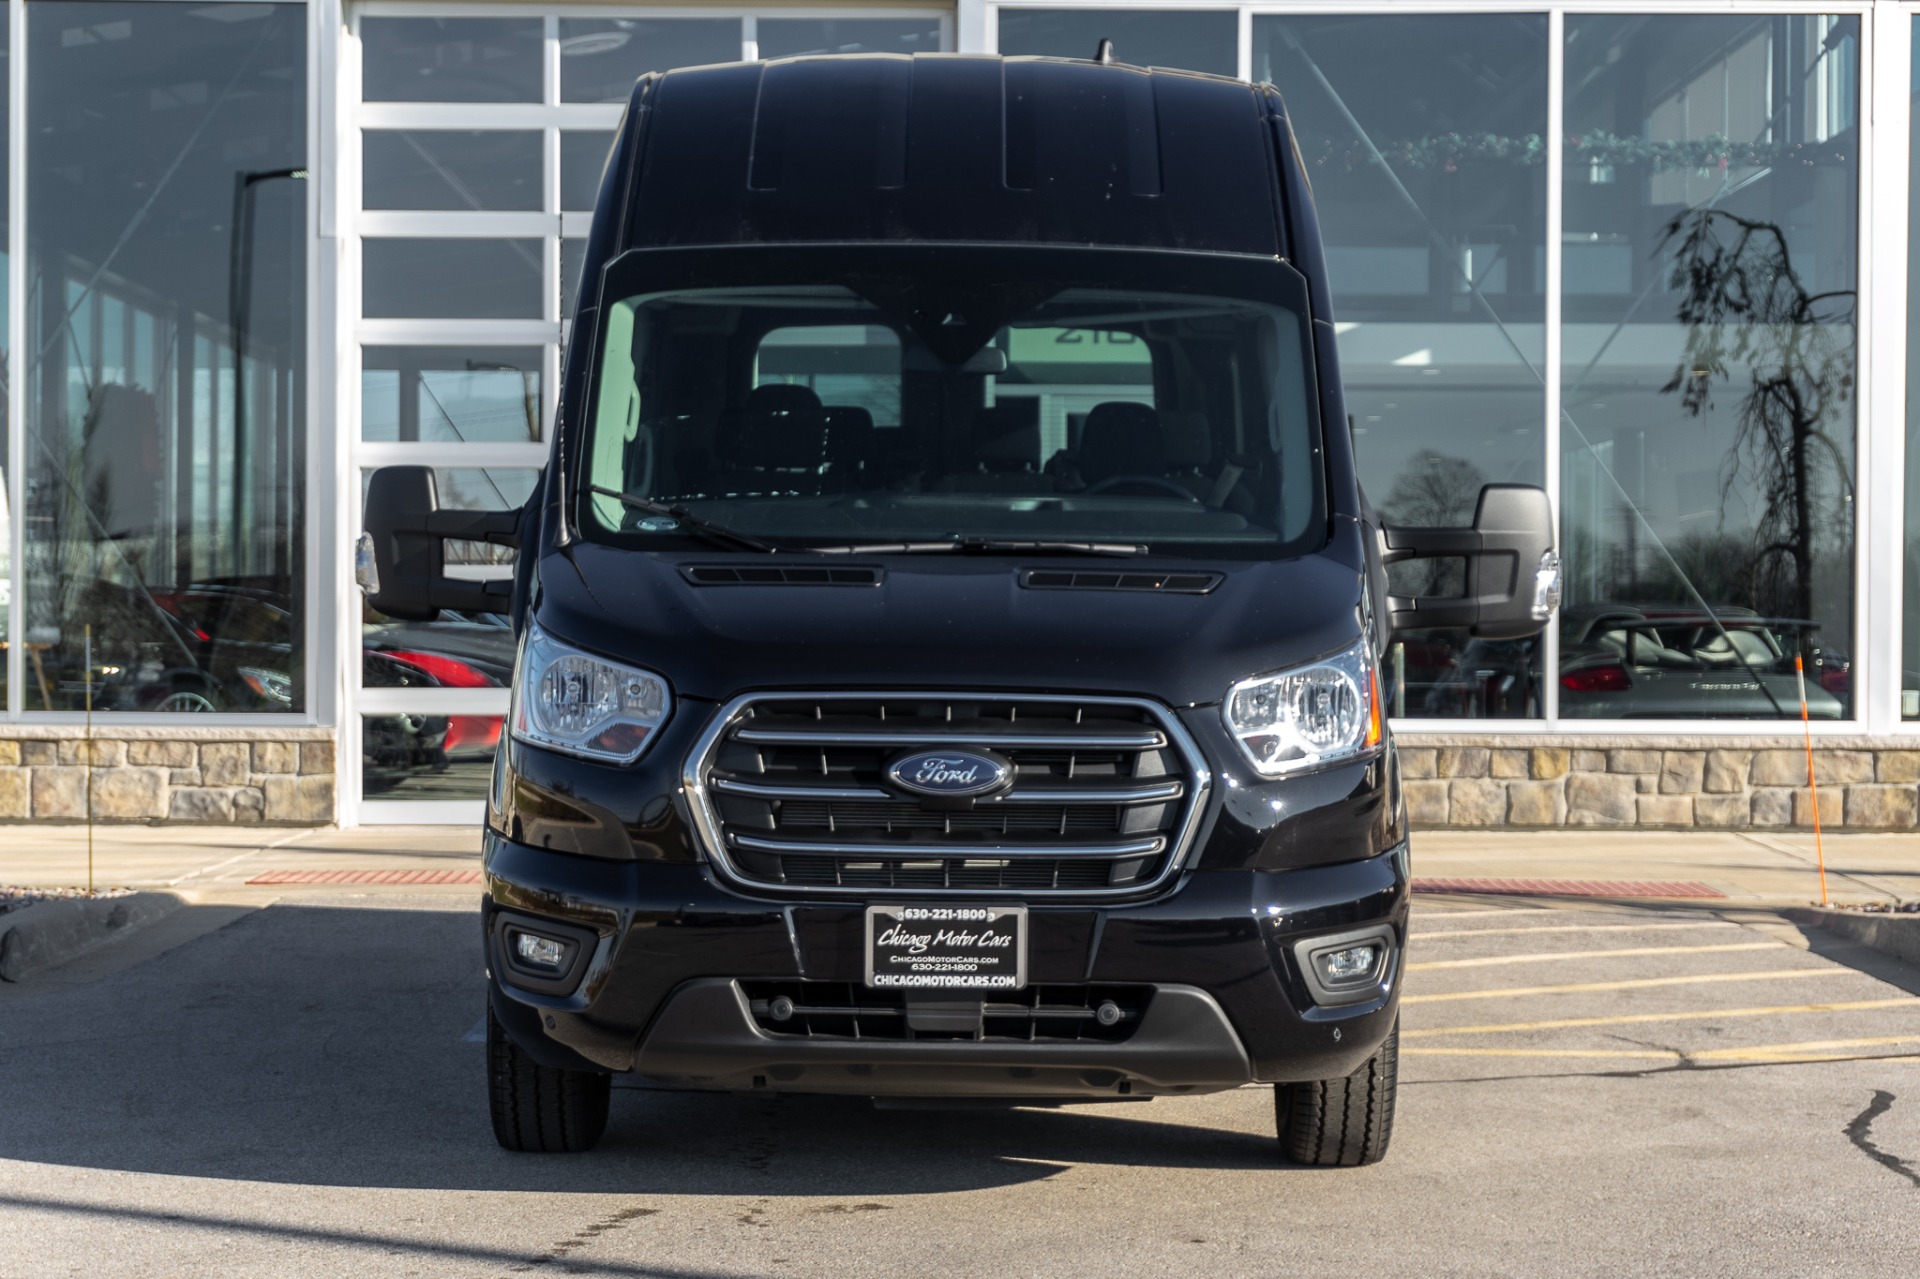 2020 Ford Transit Prices, Reviews, and Photos - MotorTrend